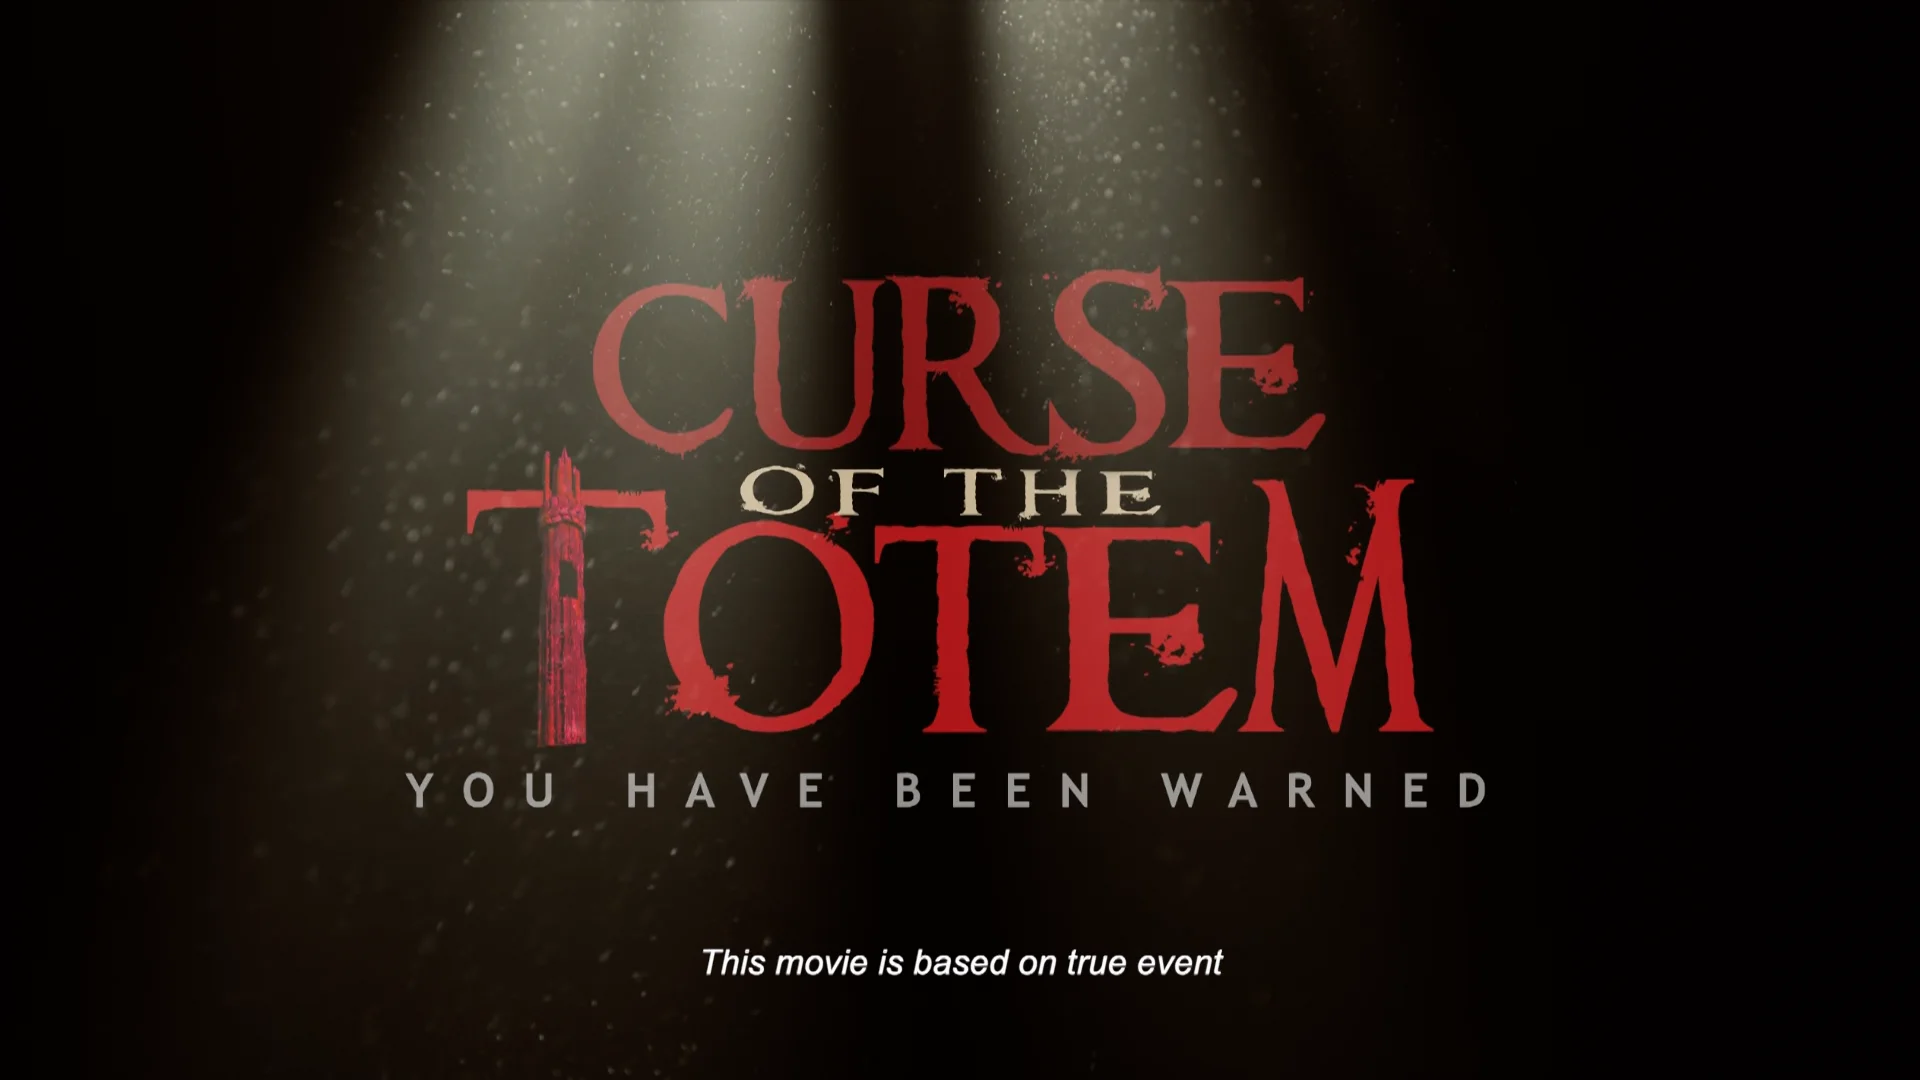 The Curse of The Totem – House of Film